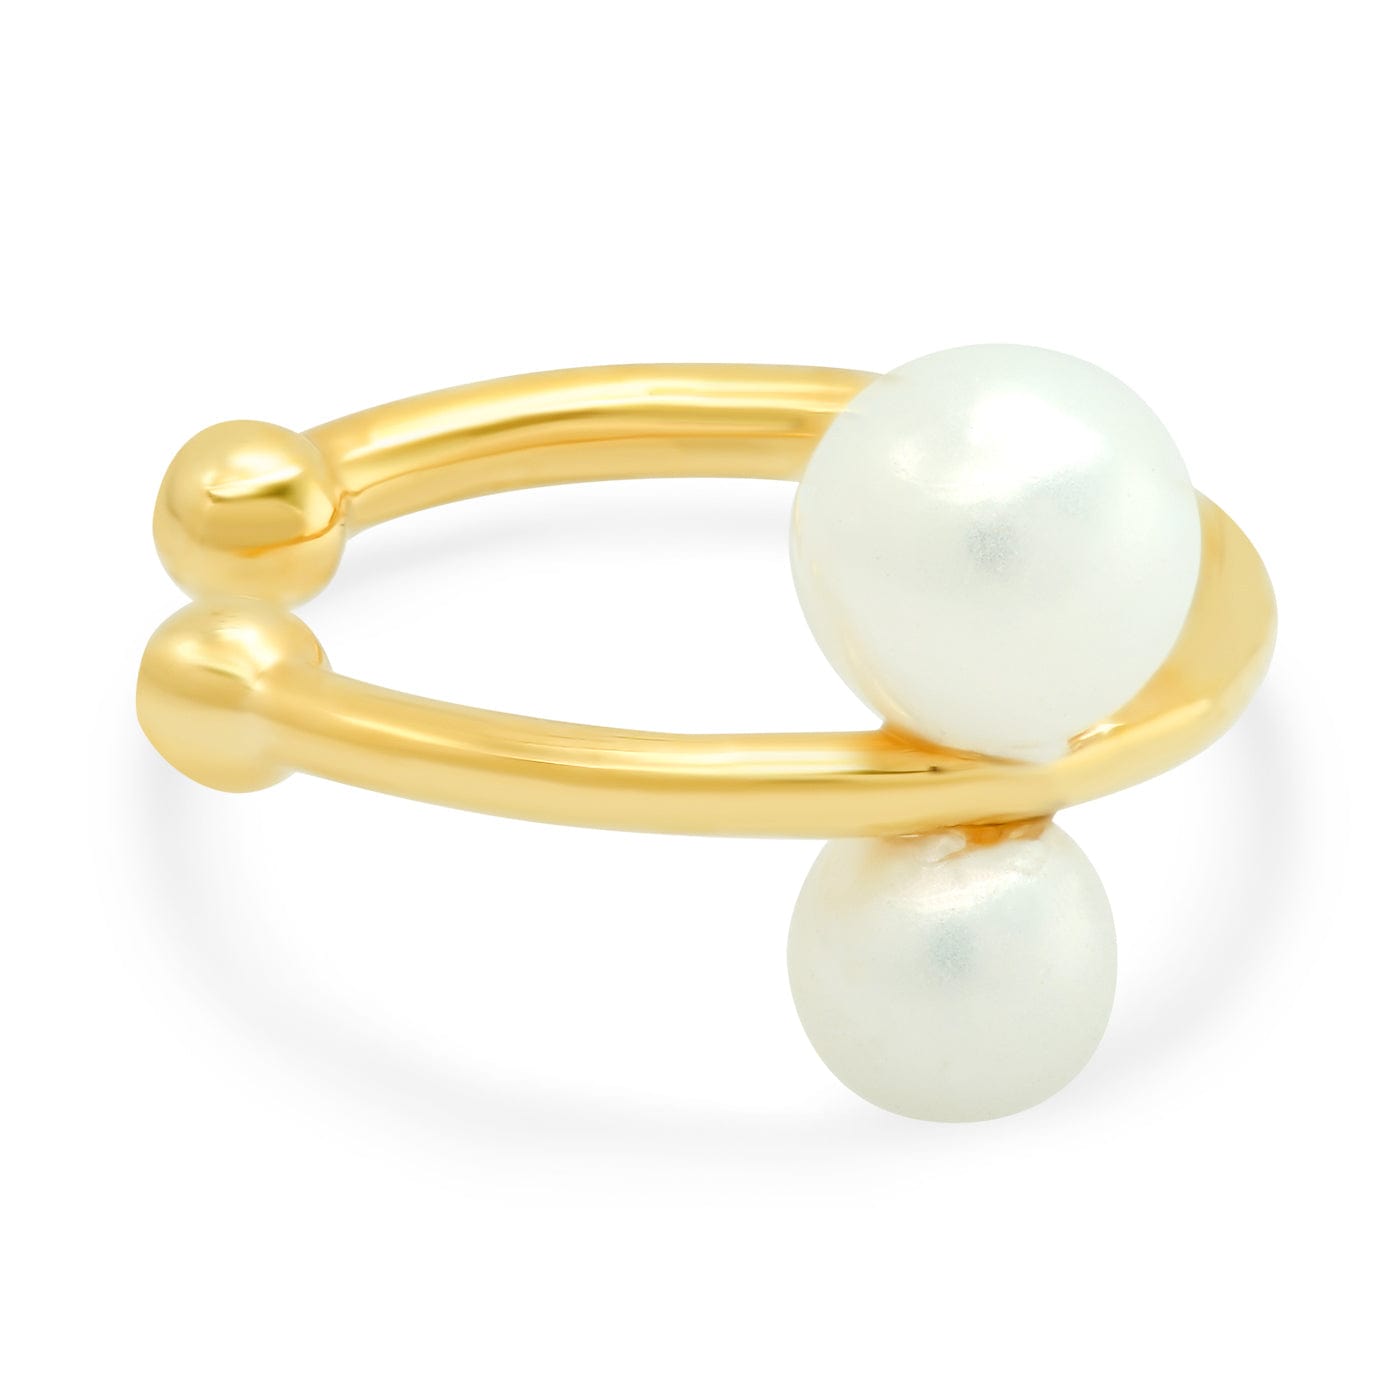 TAI JEWELRY Earrings Simple Gold Ear Cuff With Freshwater Pearl